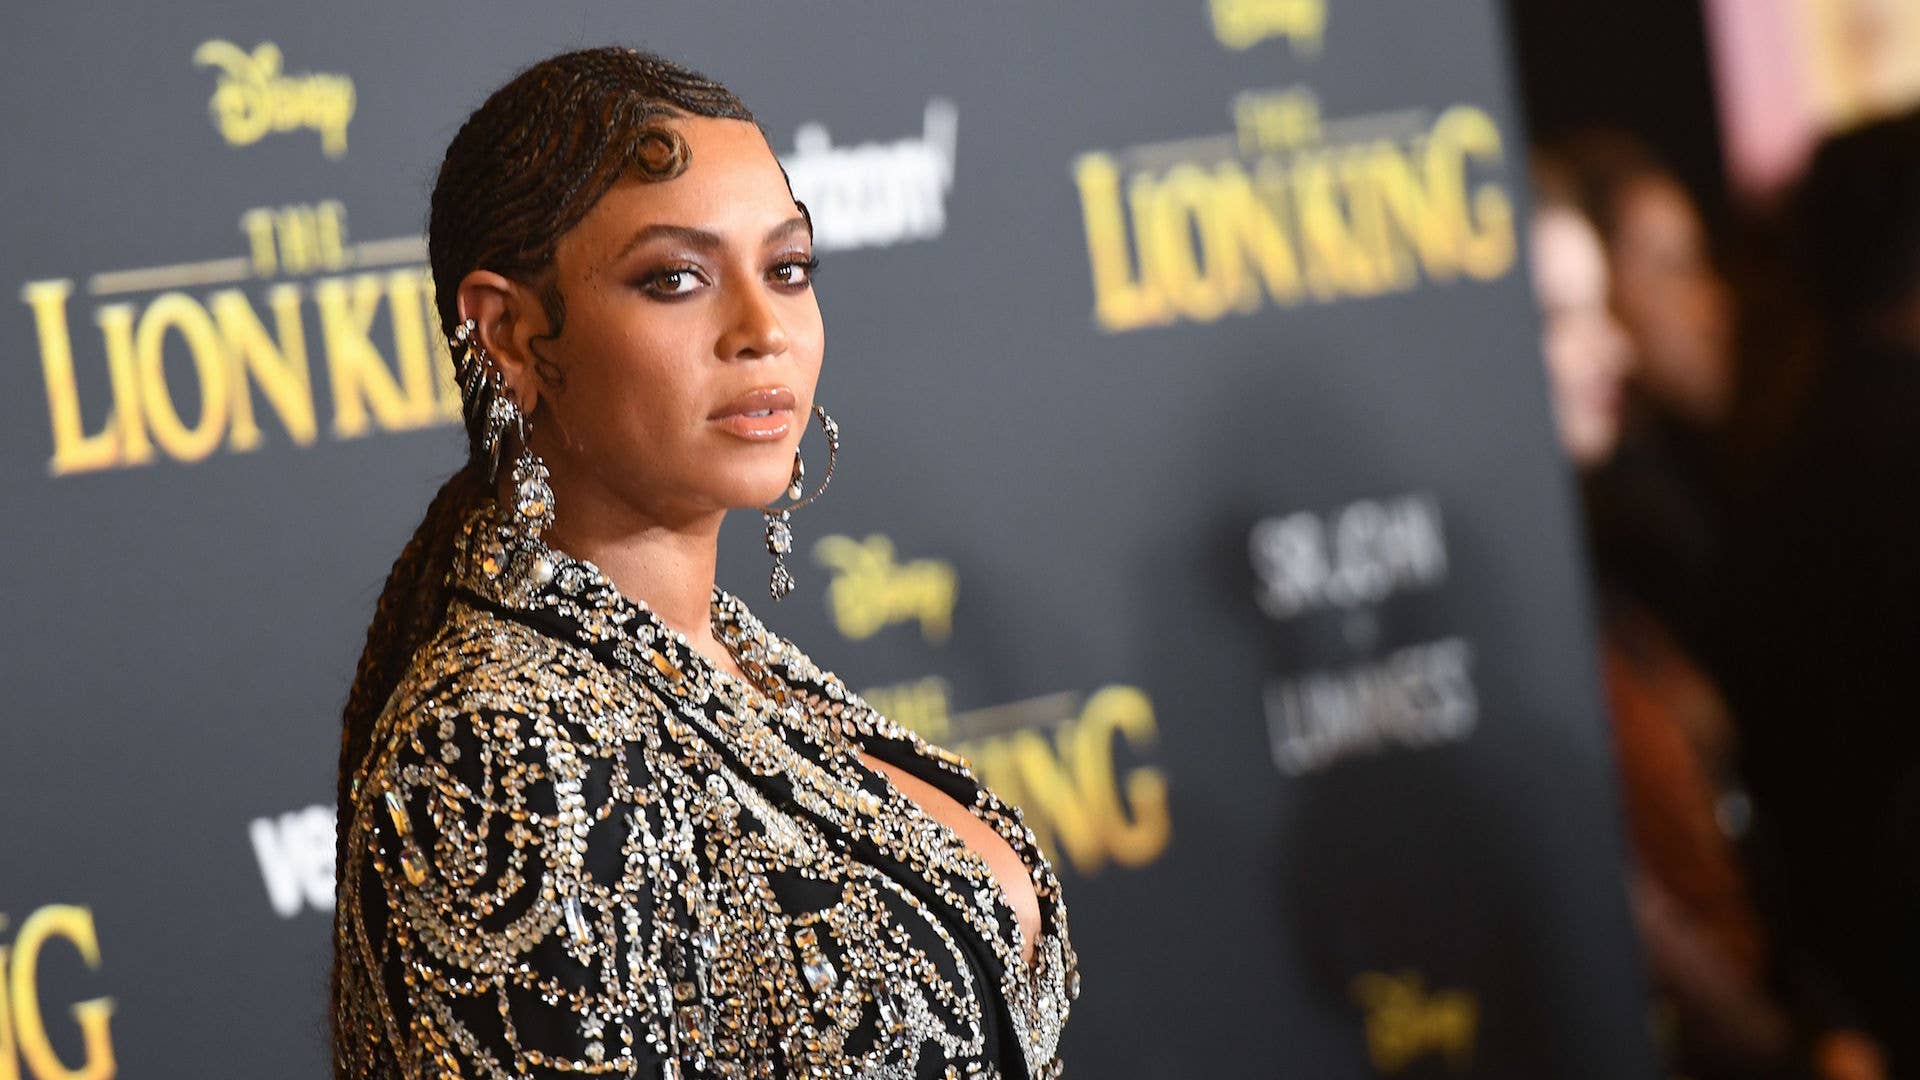 Beyonce arrives for the world premiere of Disney's "The Lion King."